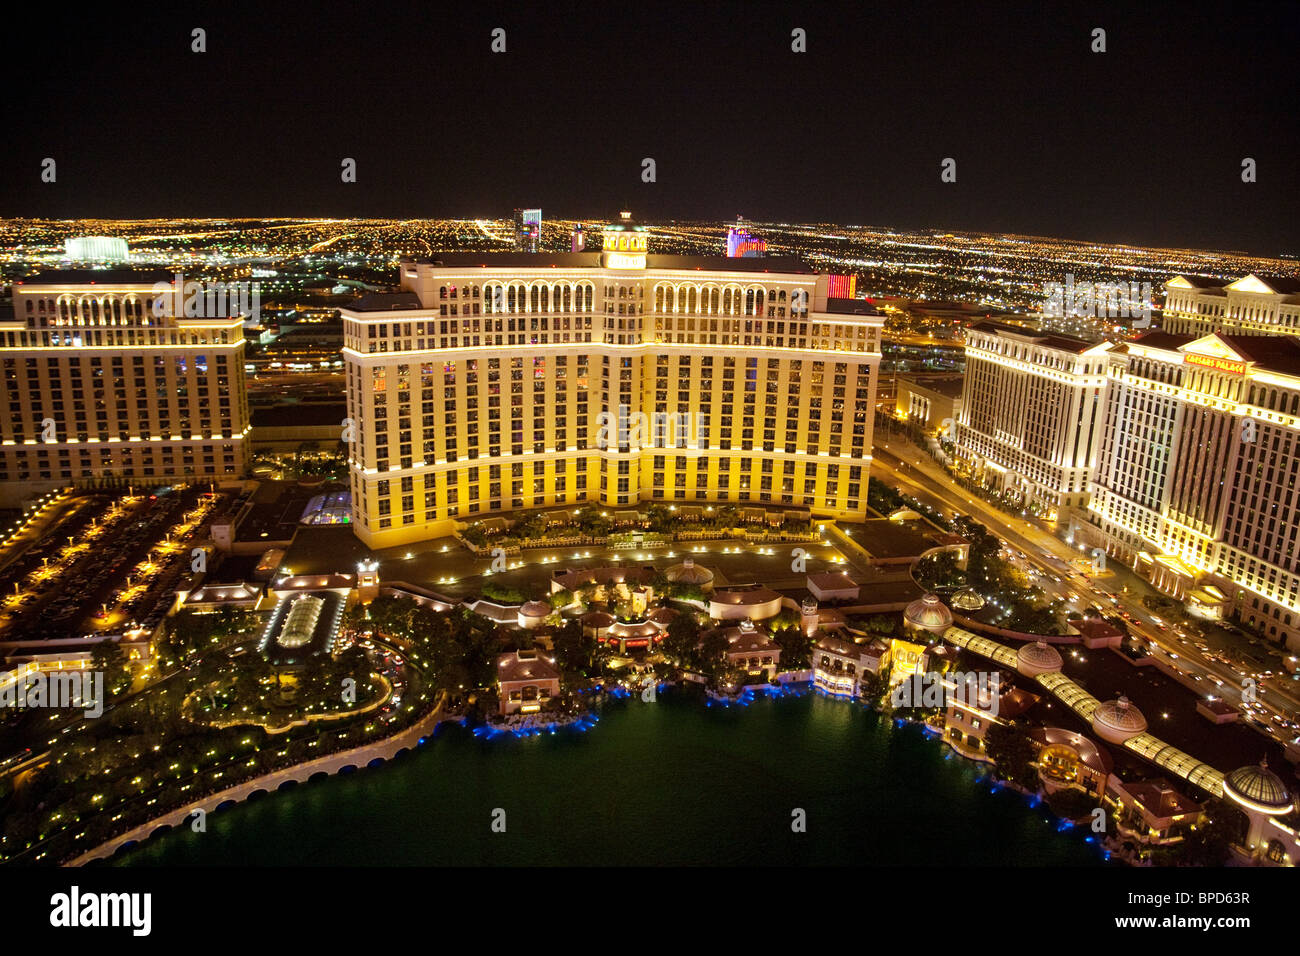 The Bellagio Hotel at night, seen from the top of the eiffel tower, the Paris Hotel, The Strip, Las Vegas, Nevada USA Stock Photo